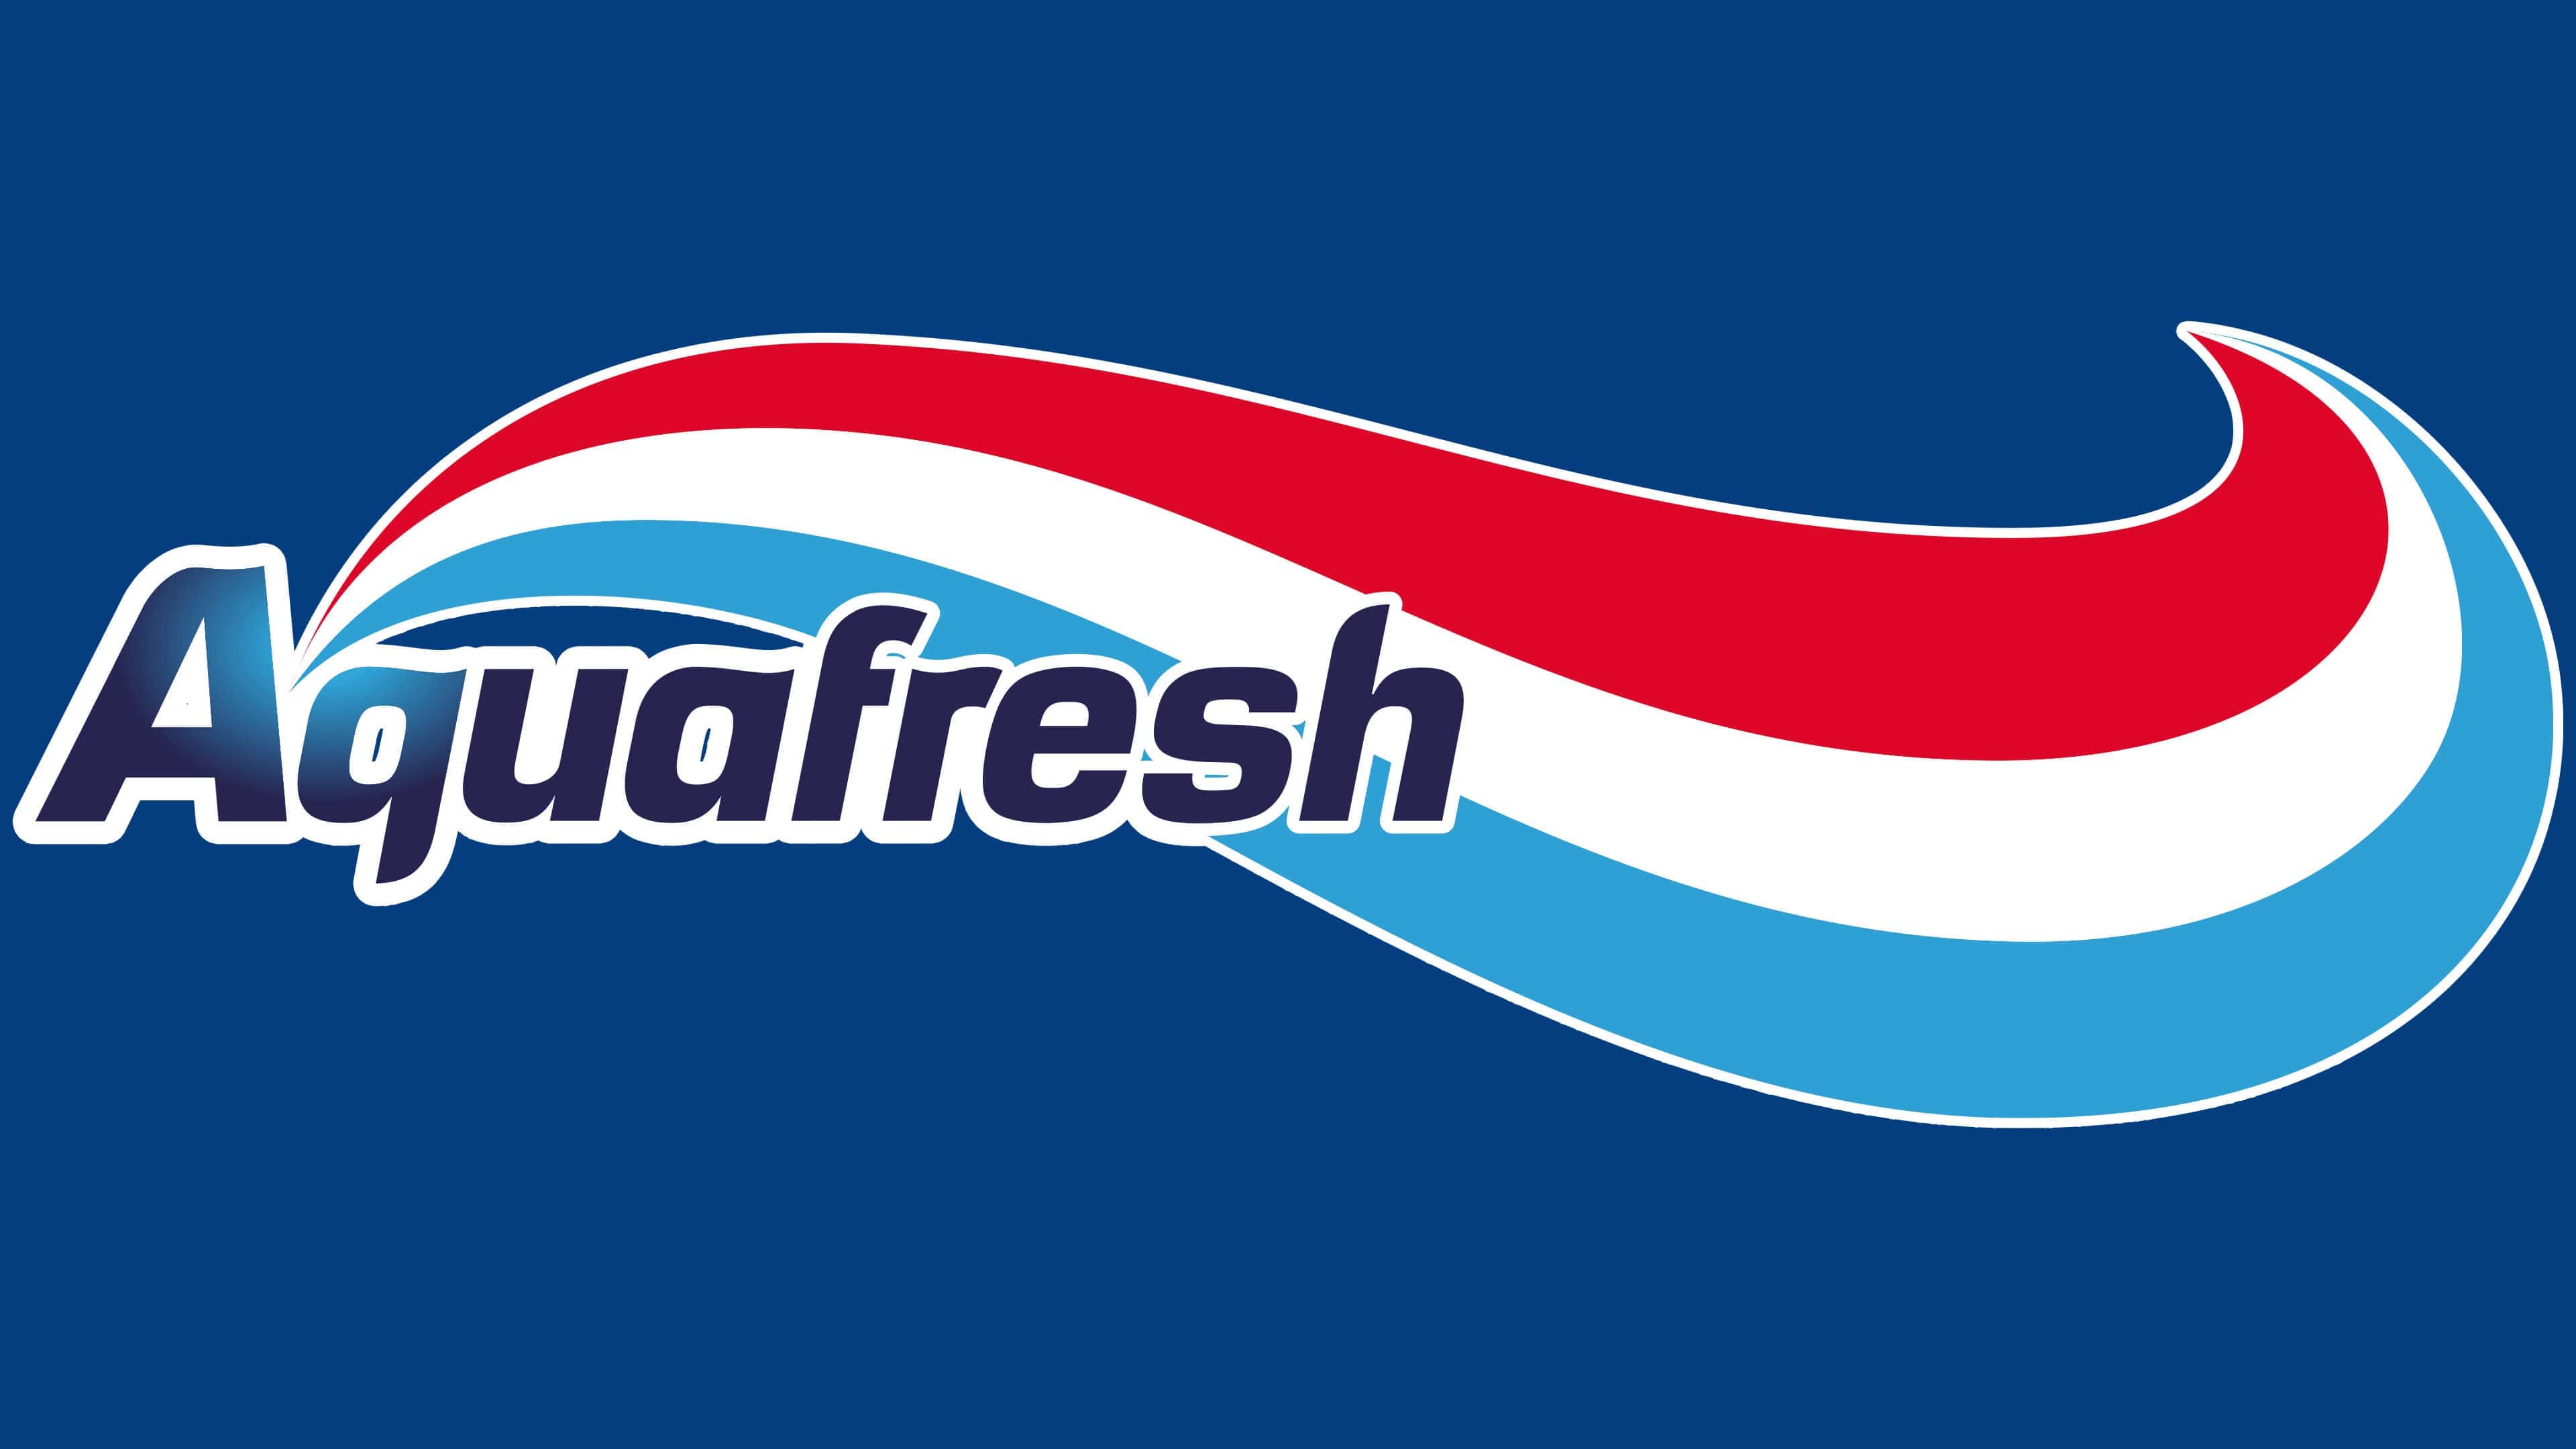 toothpaste two font logos